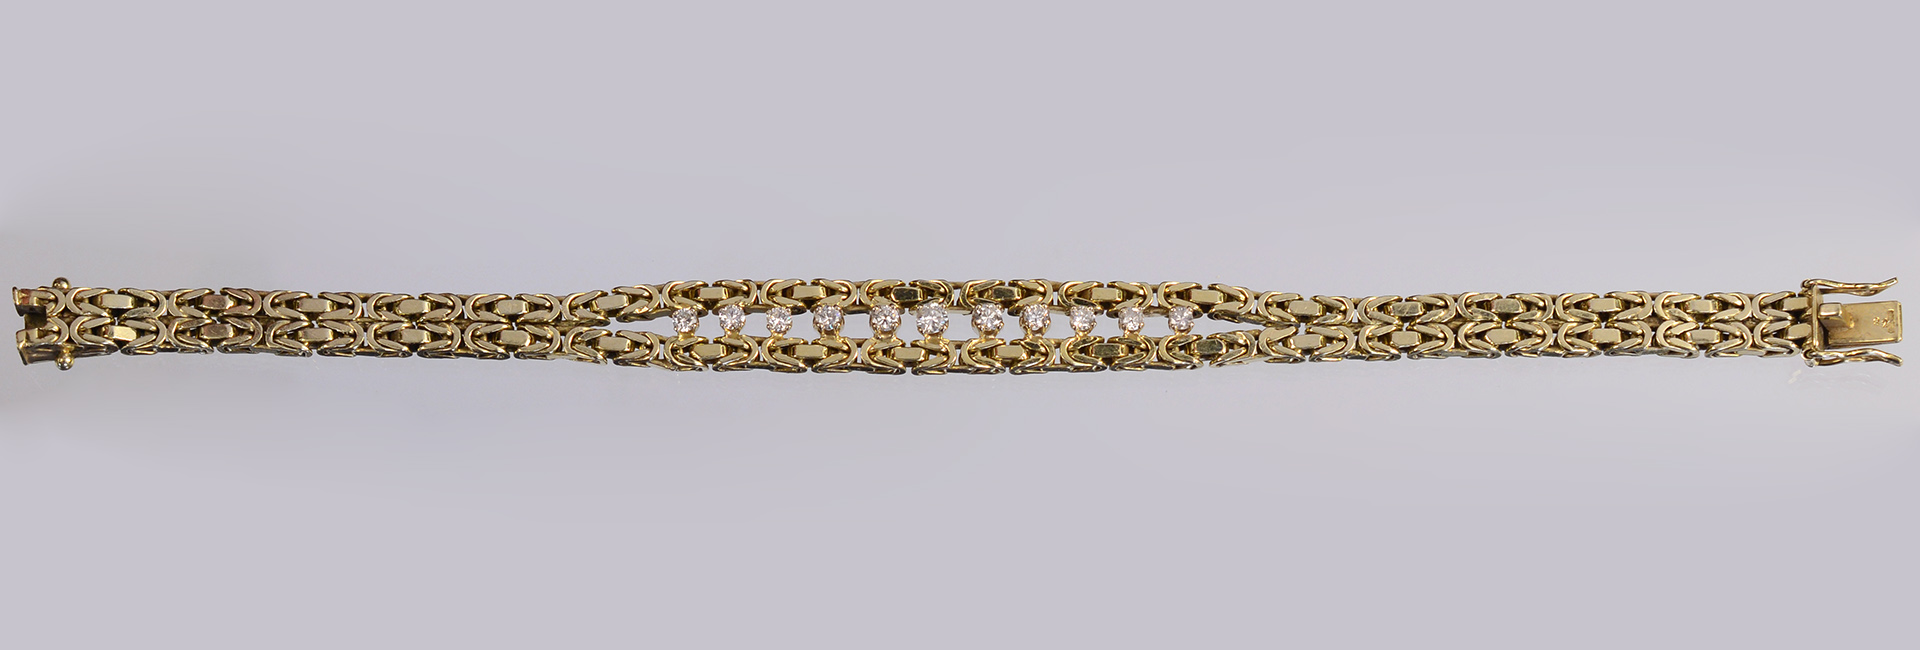 THE BUYER PREMIUM IN THIS AUCTION JUST 5%| [Golden Bracelet with diamonds]